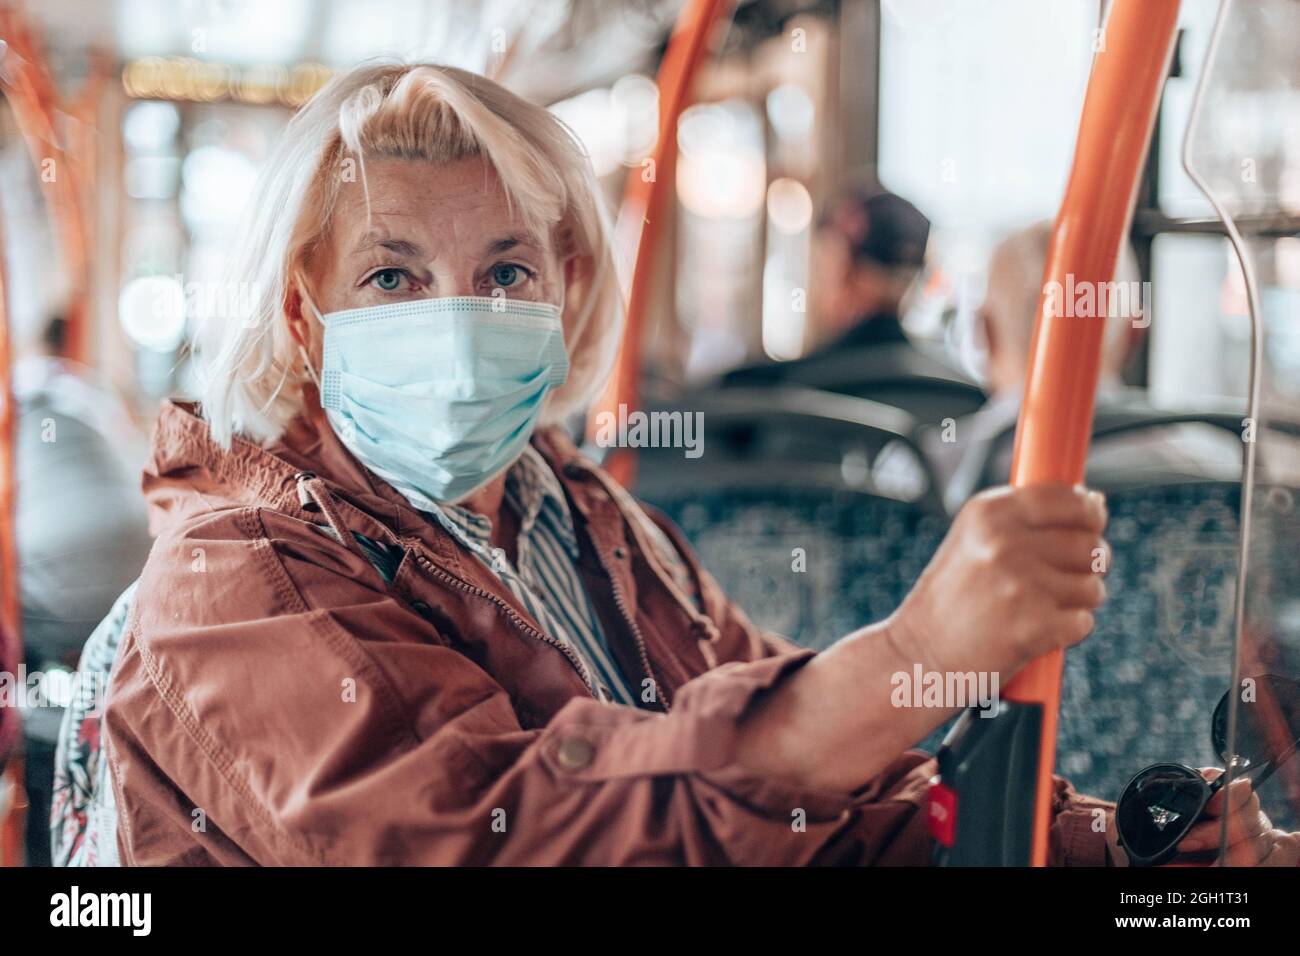 An adult 40-50 year old female passenger wearing a surgical mask on a subway train or bus transport while traveling in a big city during Covid 19 Stock Photo